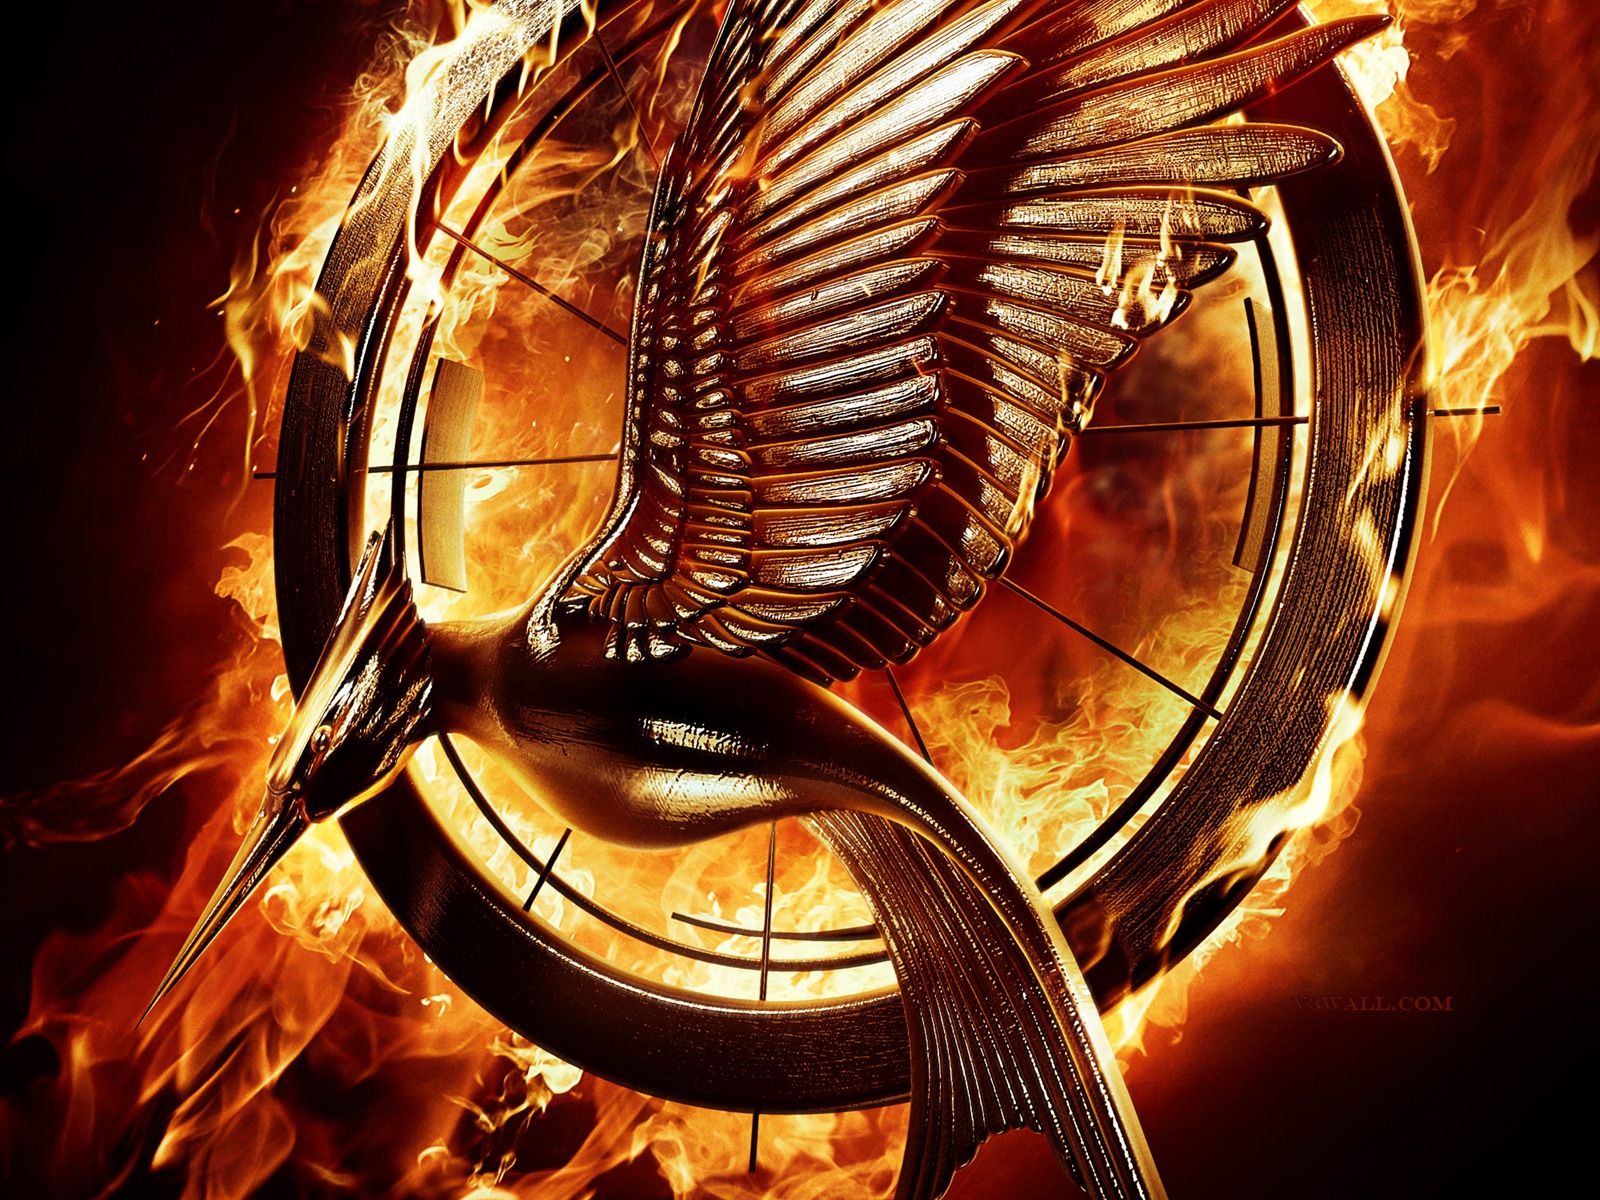 The Hunger Games: Catching Fire wallpapers HD #17 - 1600x1200